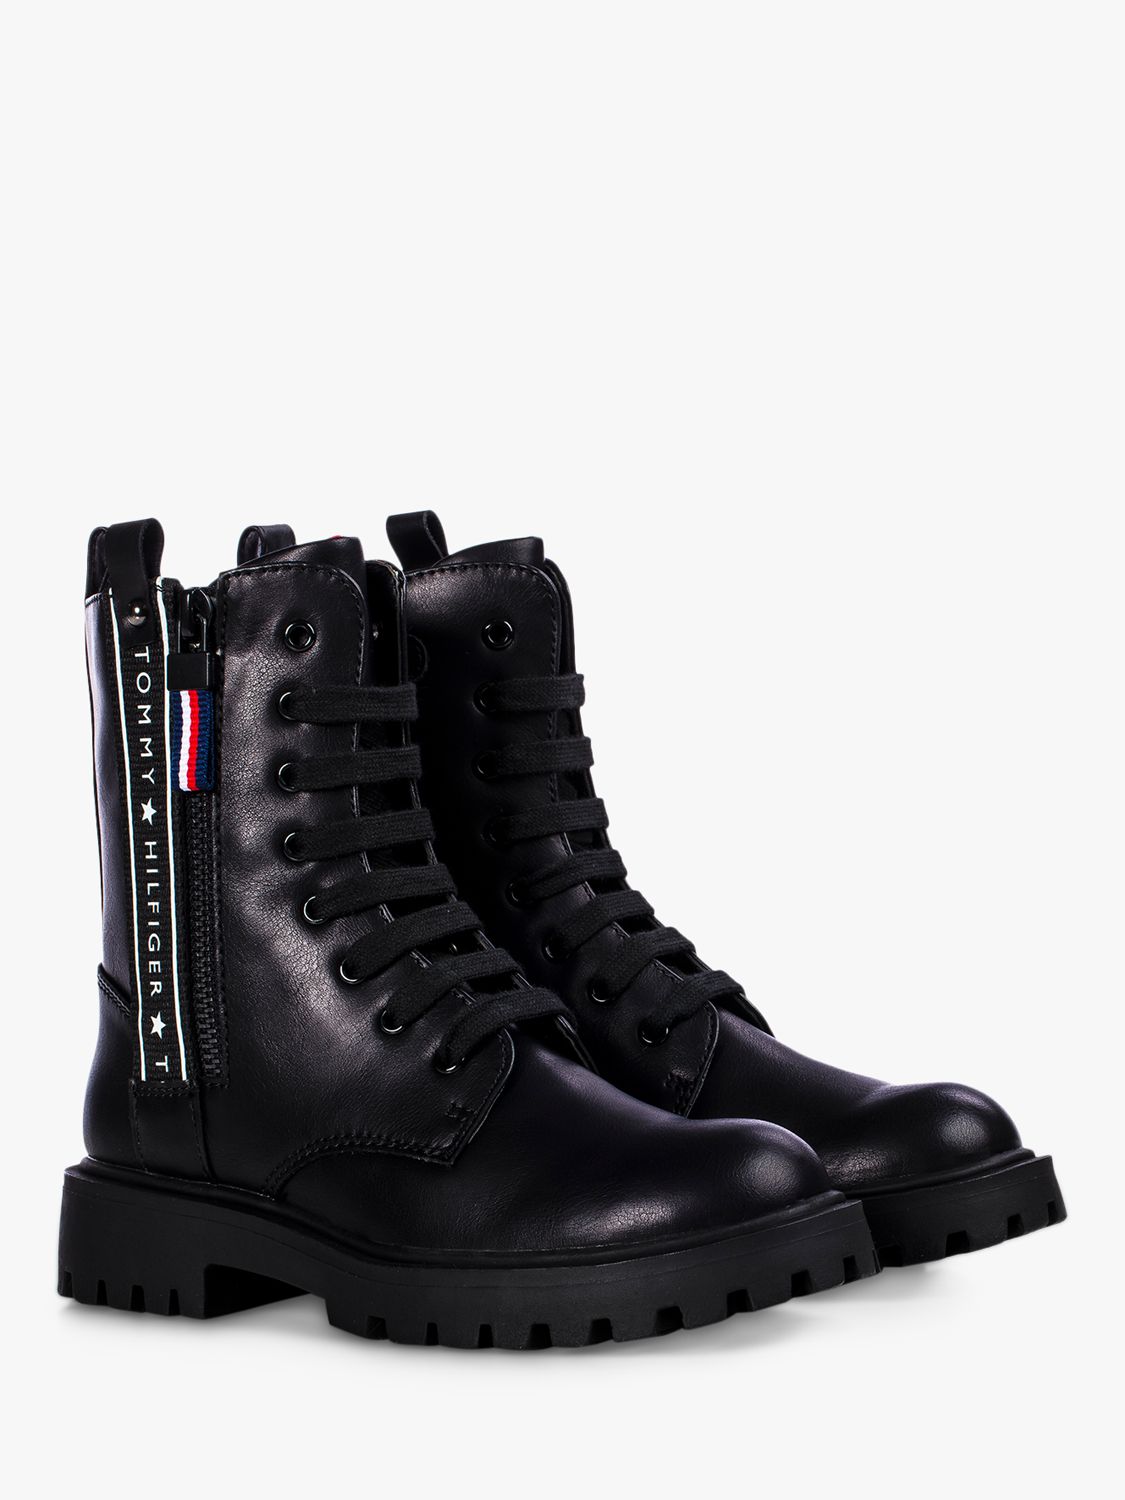 Repeat Logo Tape Lace-Up Boots, Black 